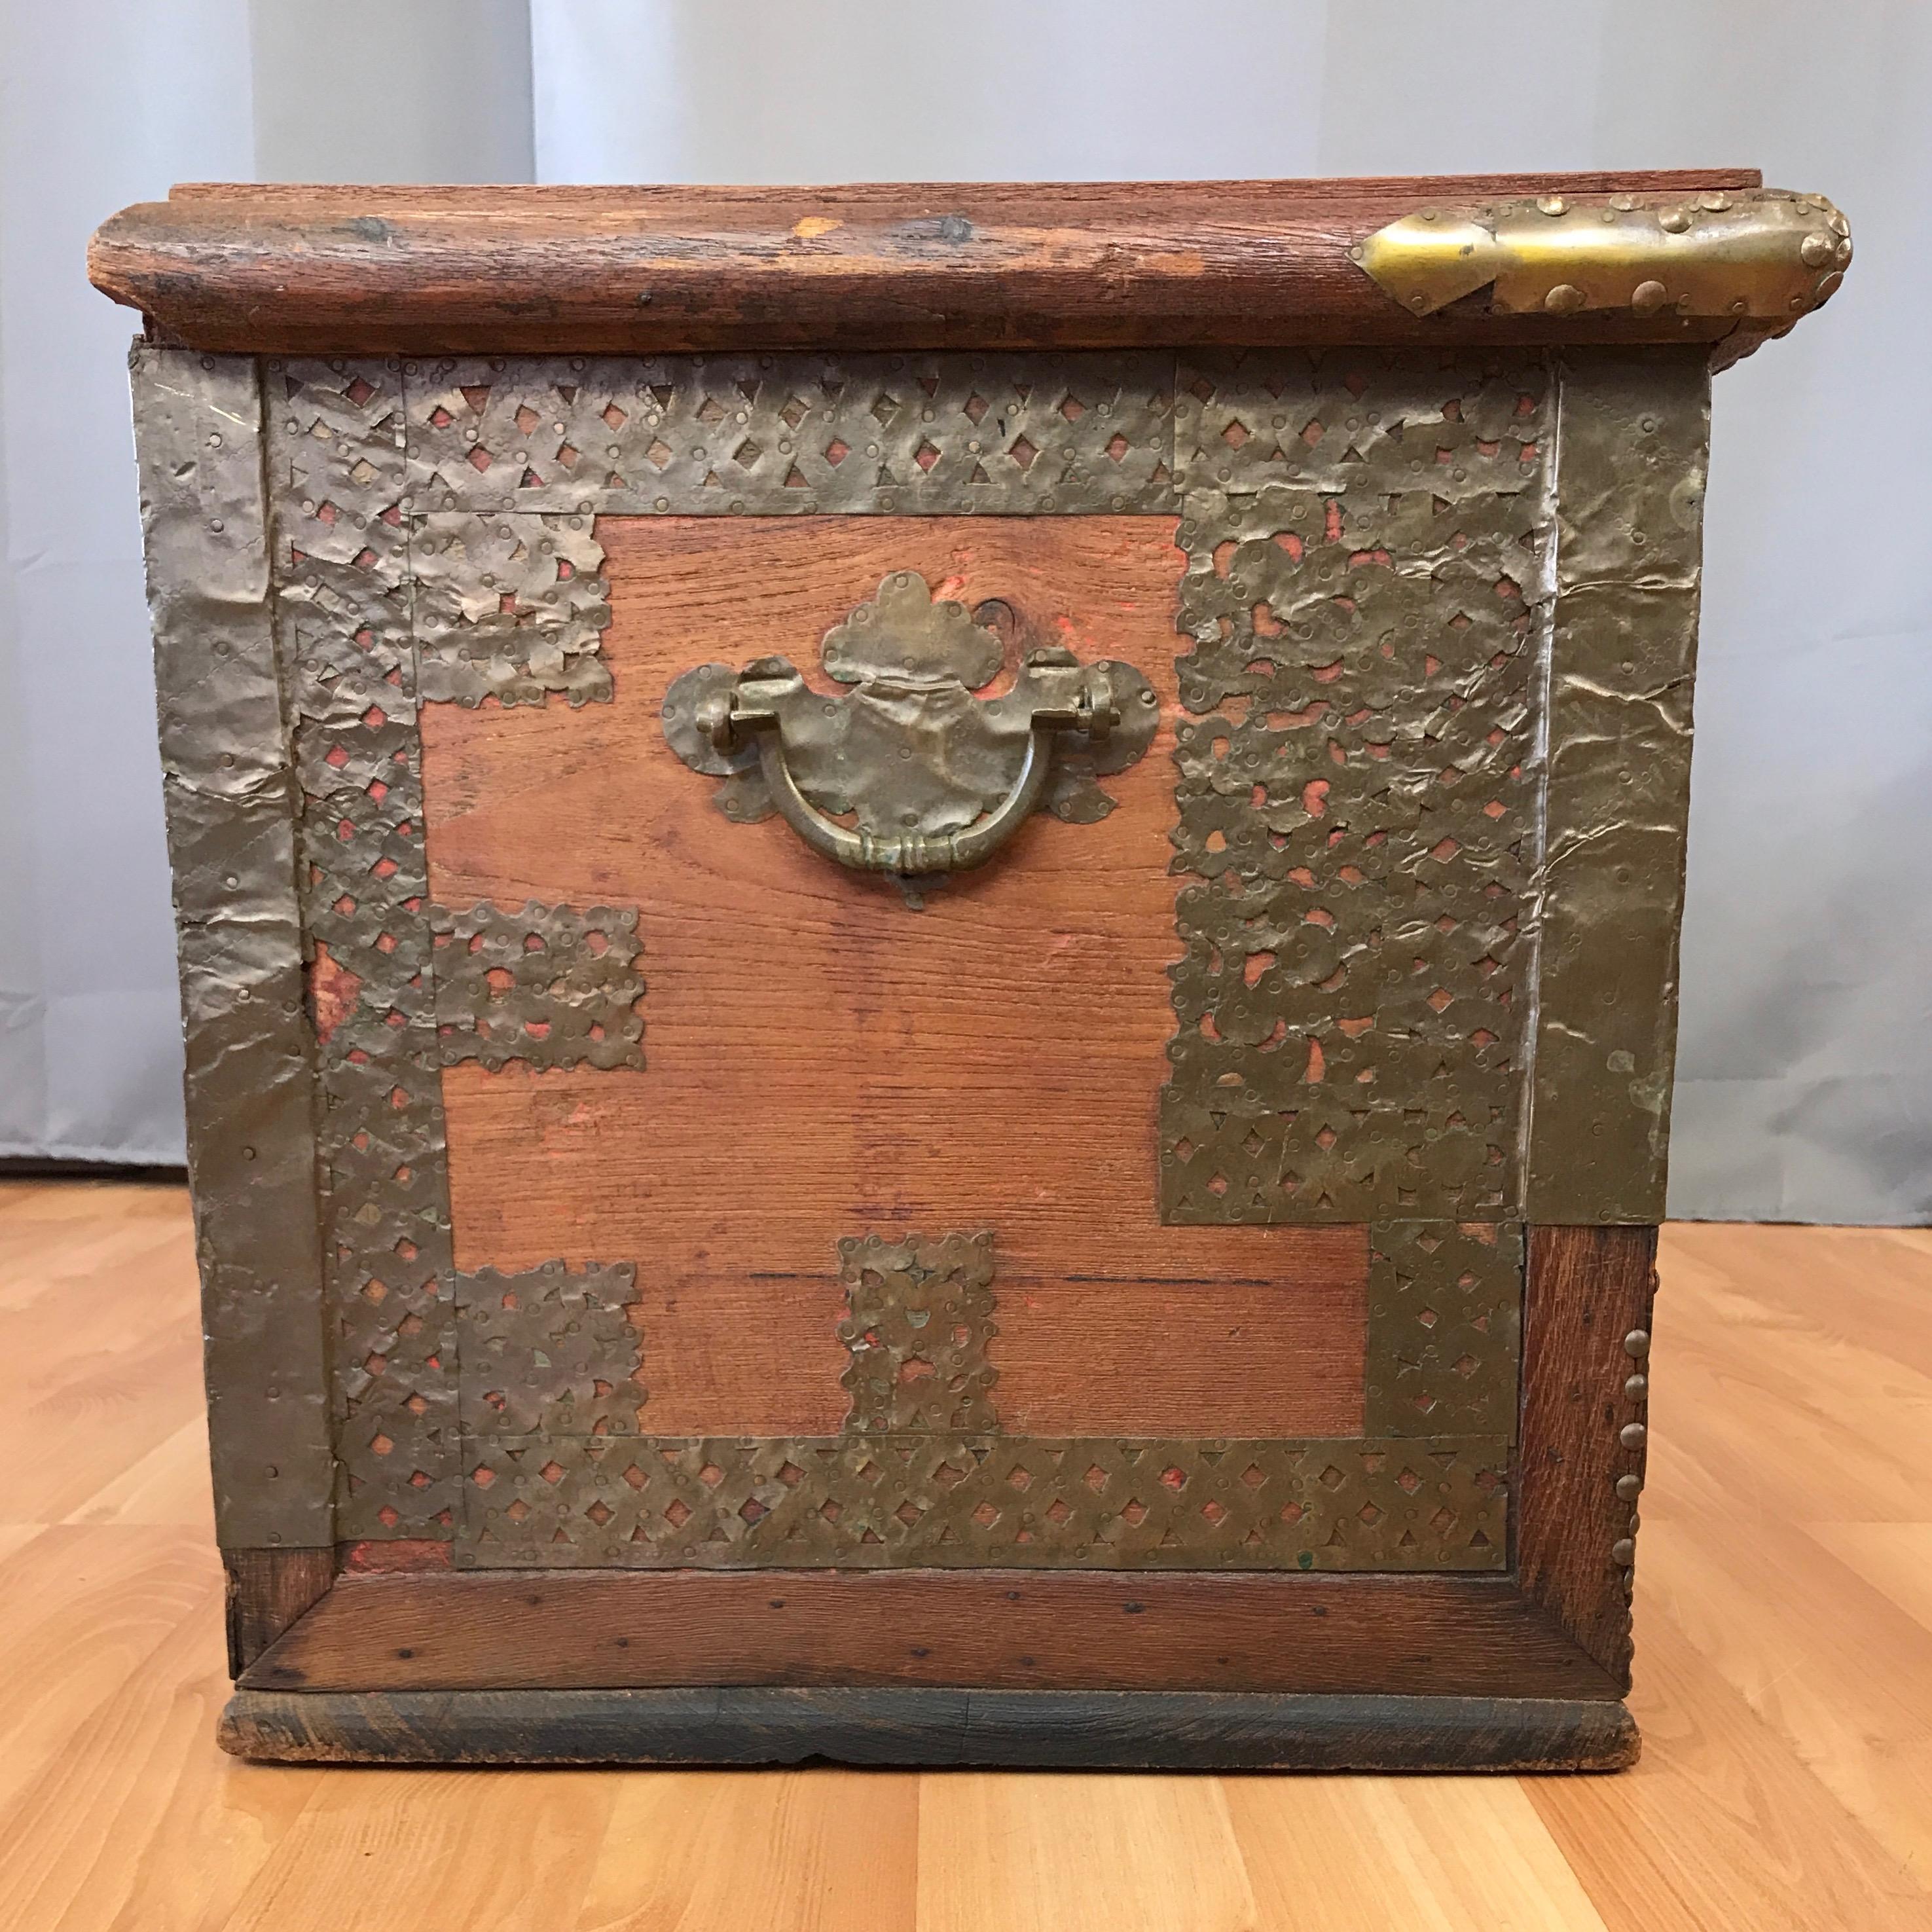 Islamic Antique Middle Eastern Brass-Clad Wood Sailor’s Chest